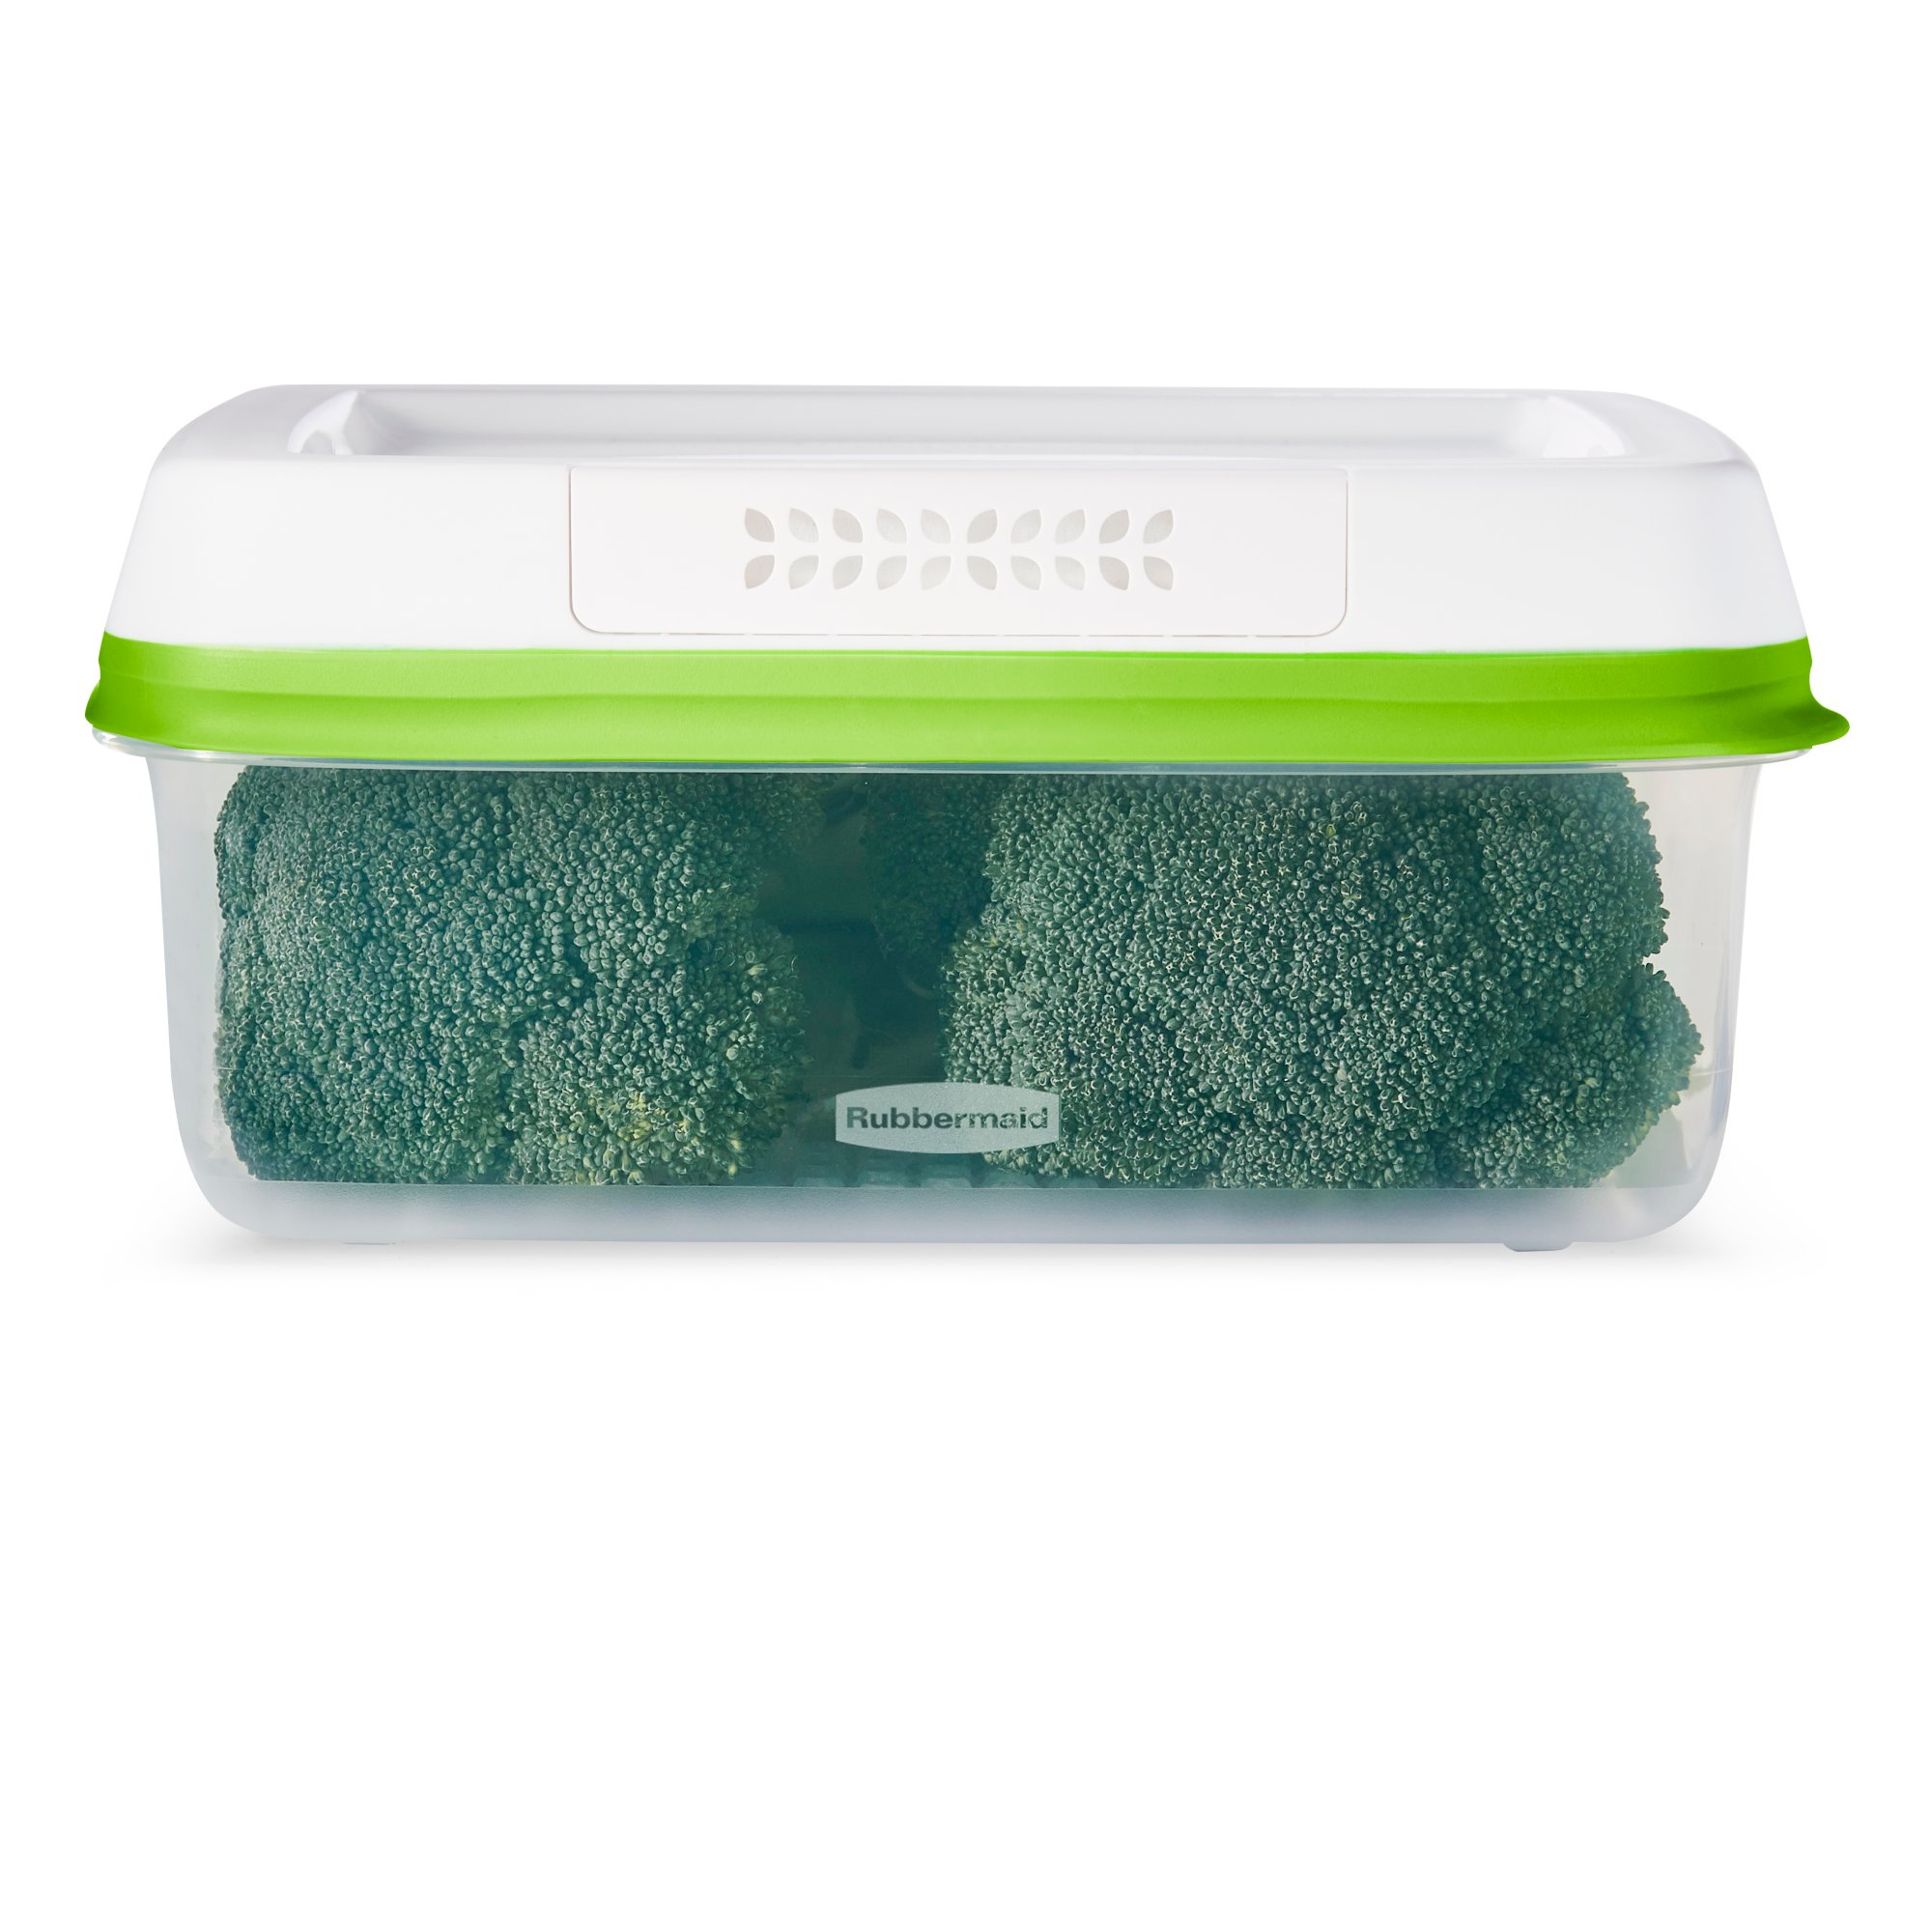 Rubbermaid FreshWorks Produce Saver, Medium and Large Produce Storage Containers, 6-Piece Set